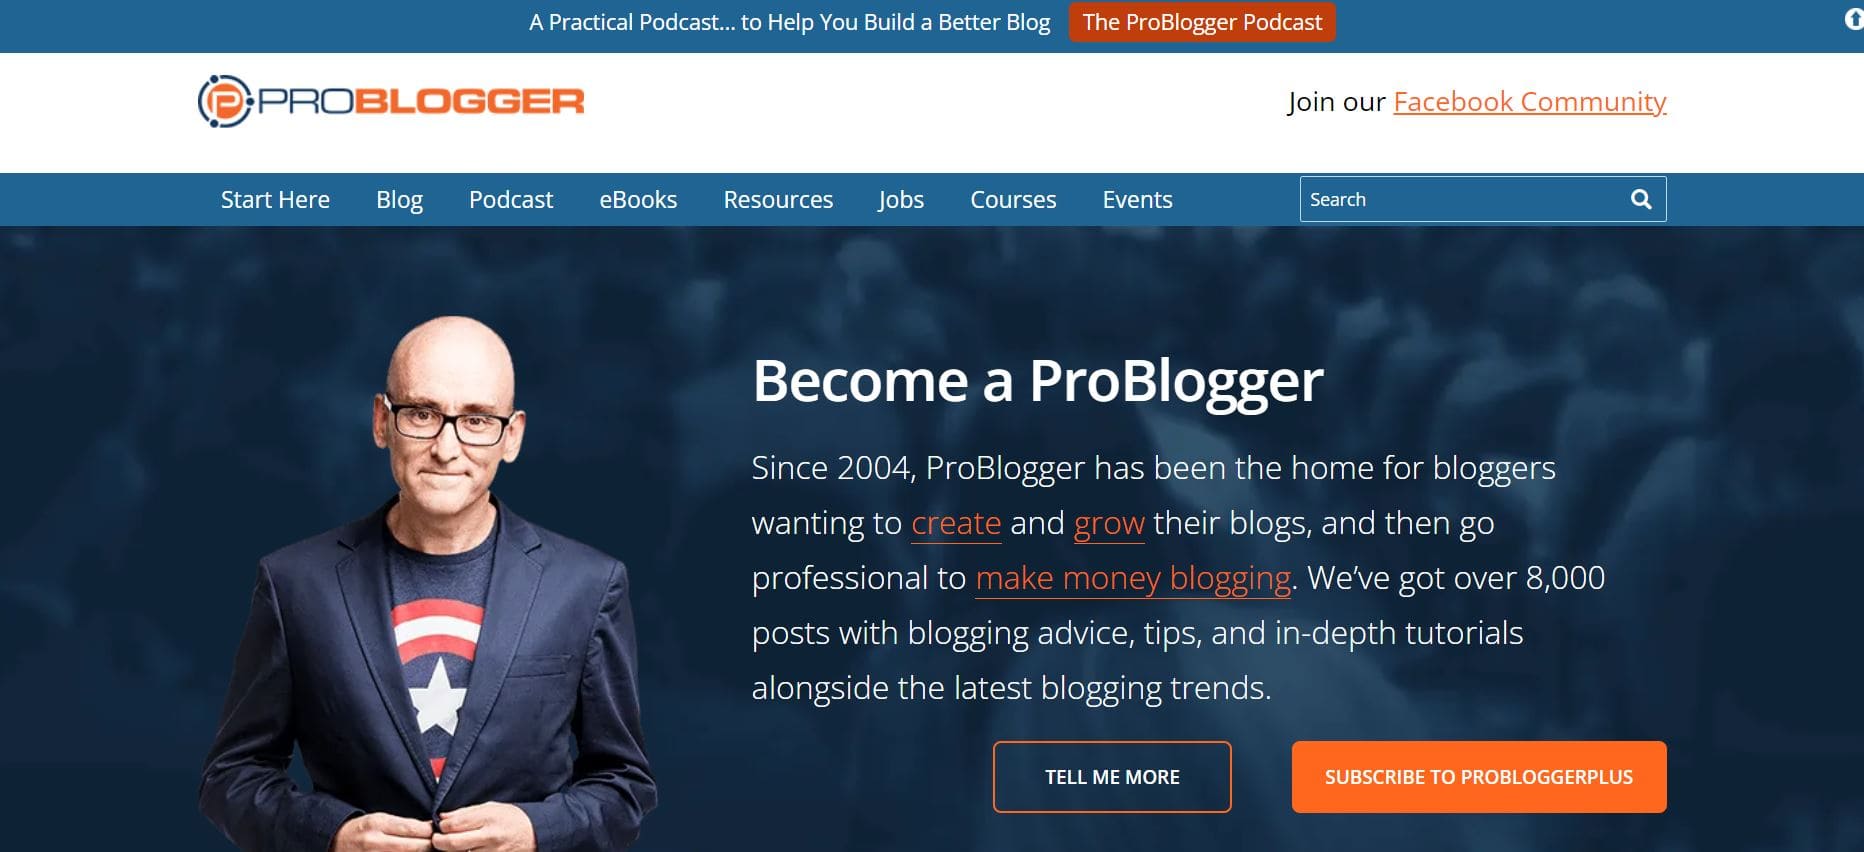 Problogger - Website For Freelance Content Writer